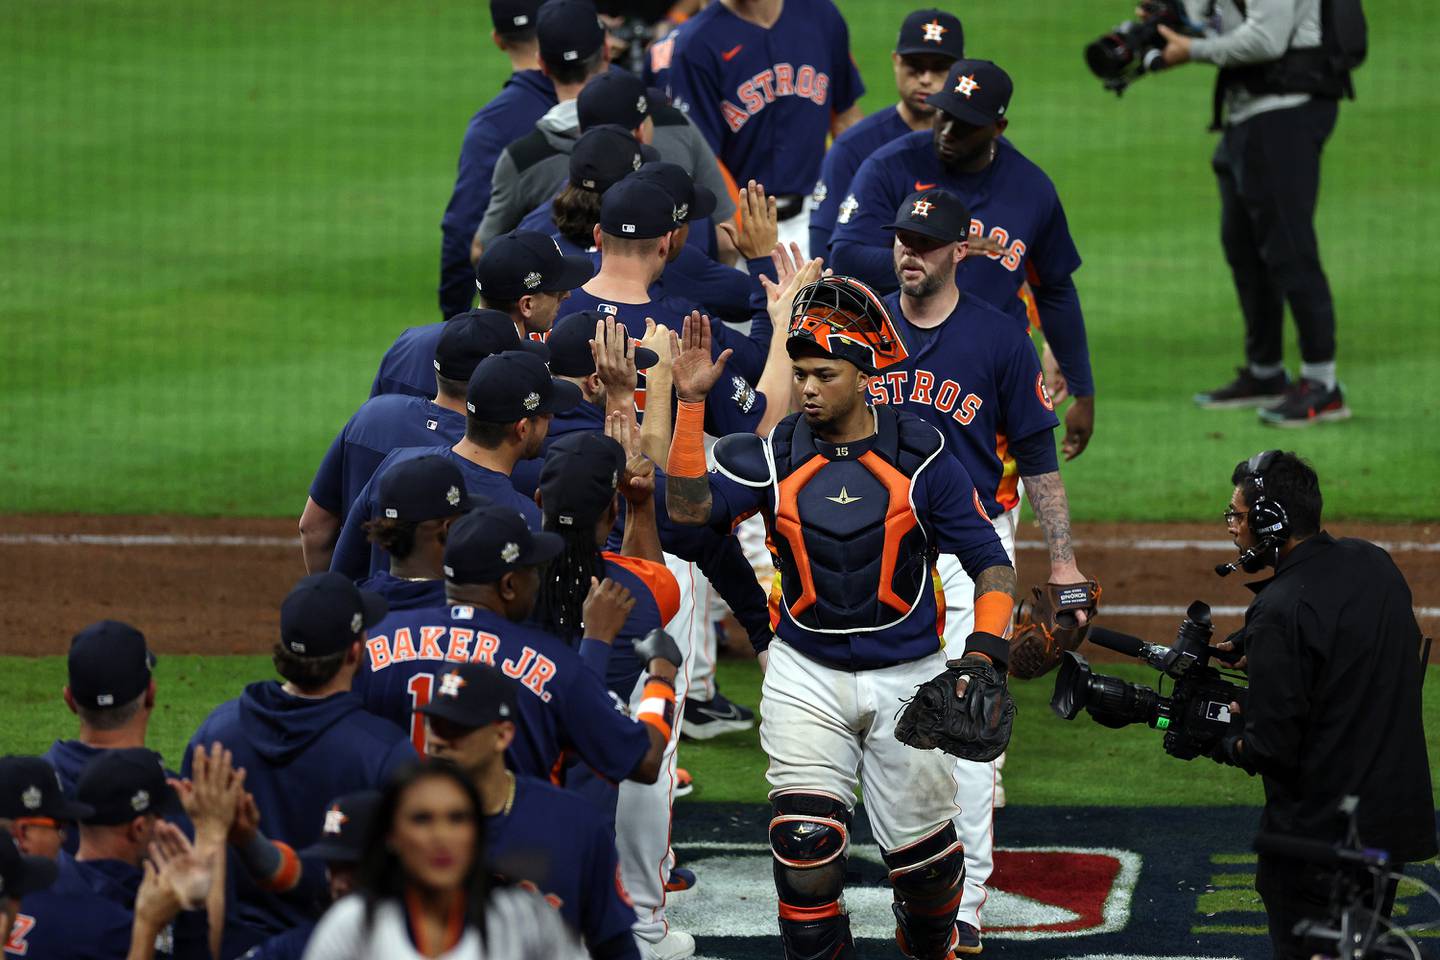 Astros players celebrate after a 5-2 win against the Phillies in Game 2 of the World Series on Saturday at Minute Maid Park in Houston.